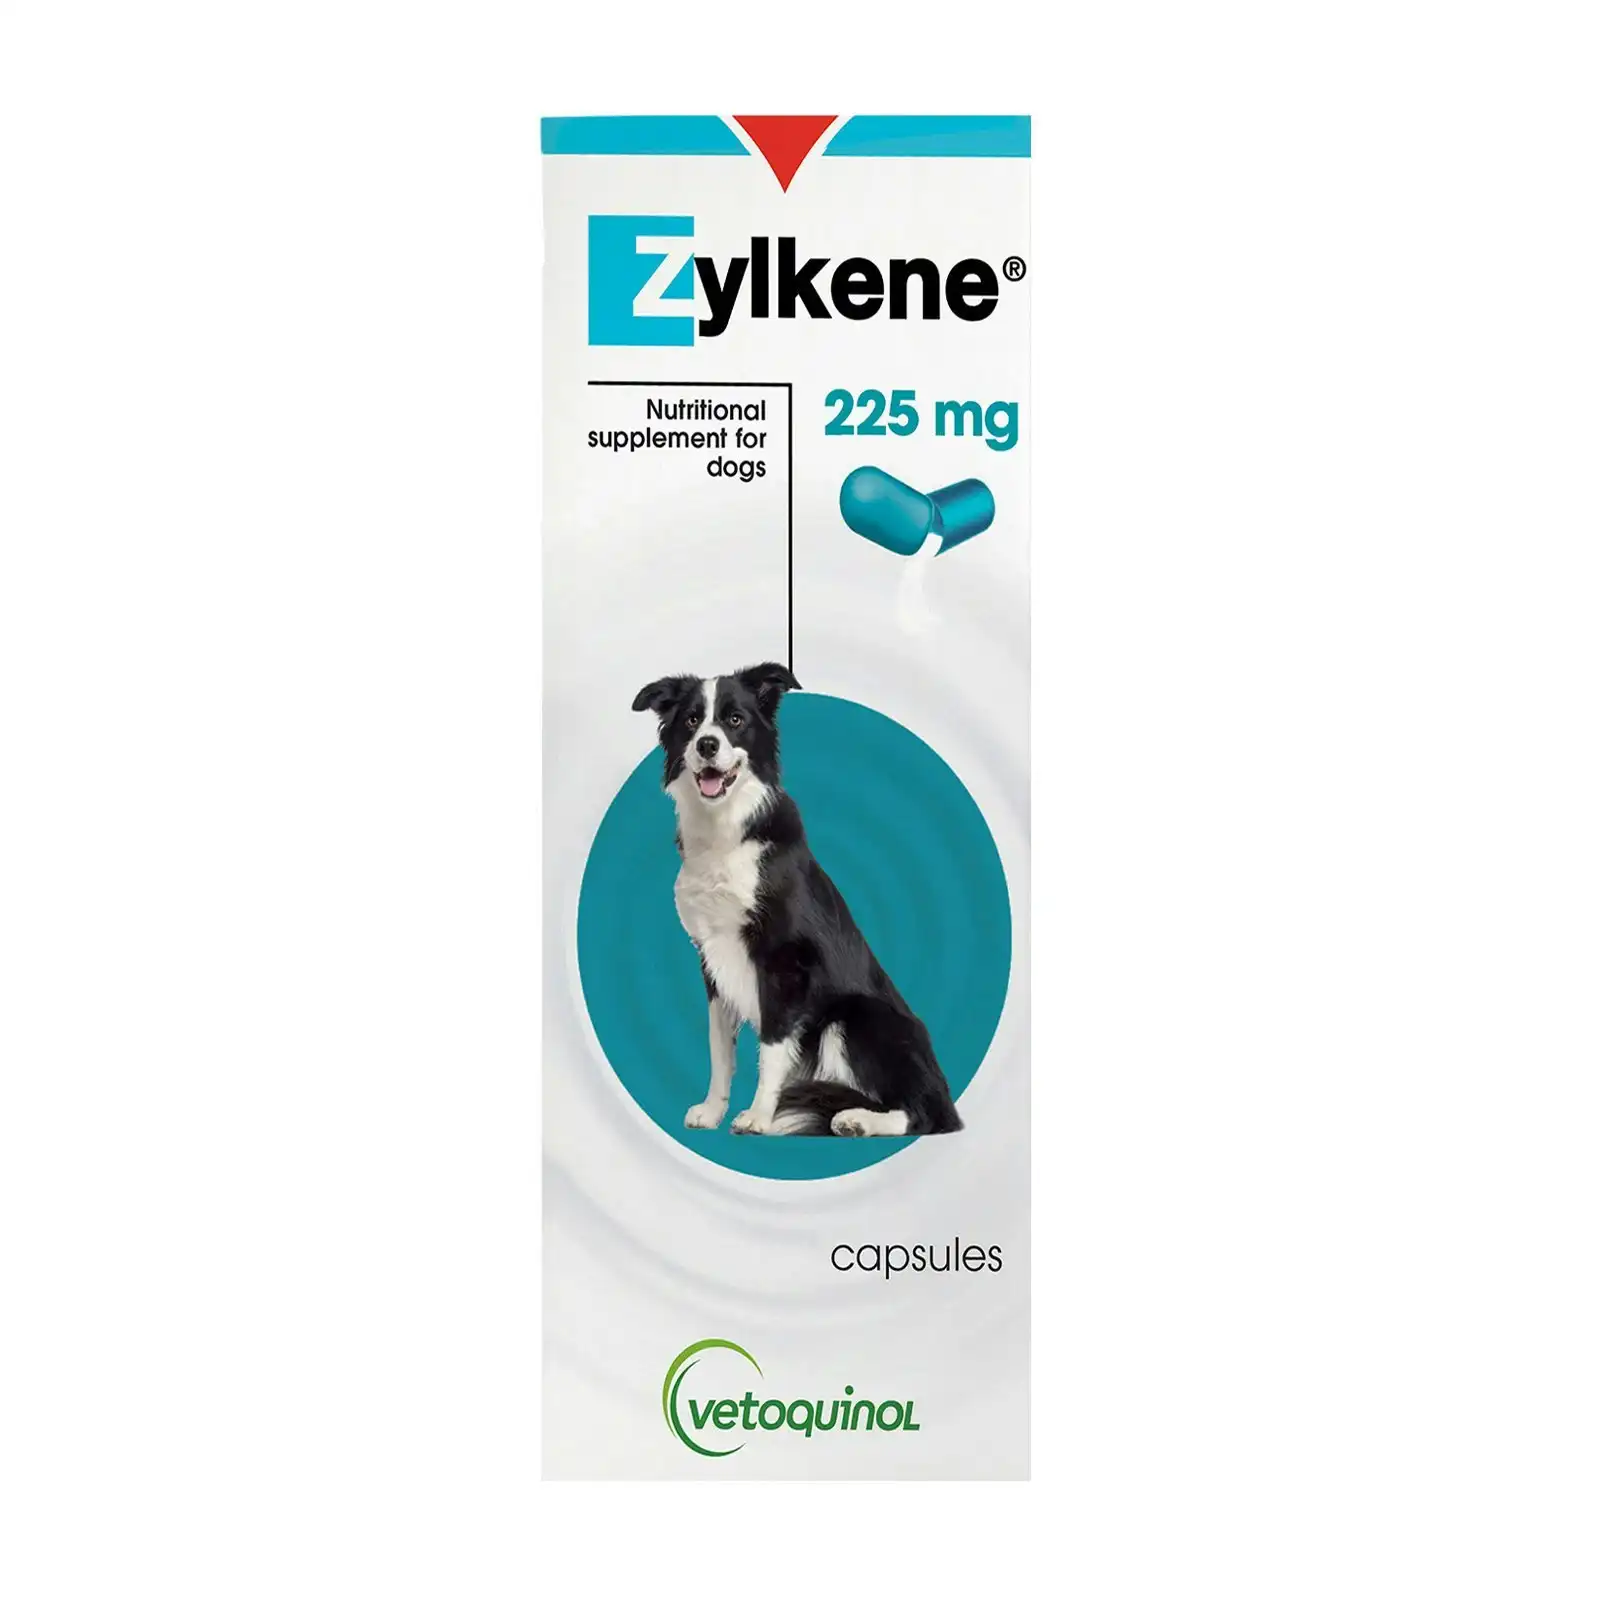 Zylkene Nutritional Supplement For Dogs 225 MG 30 Tablets